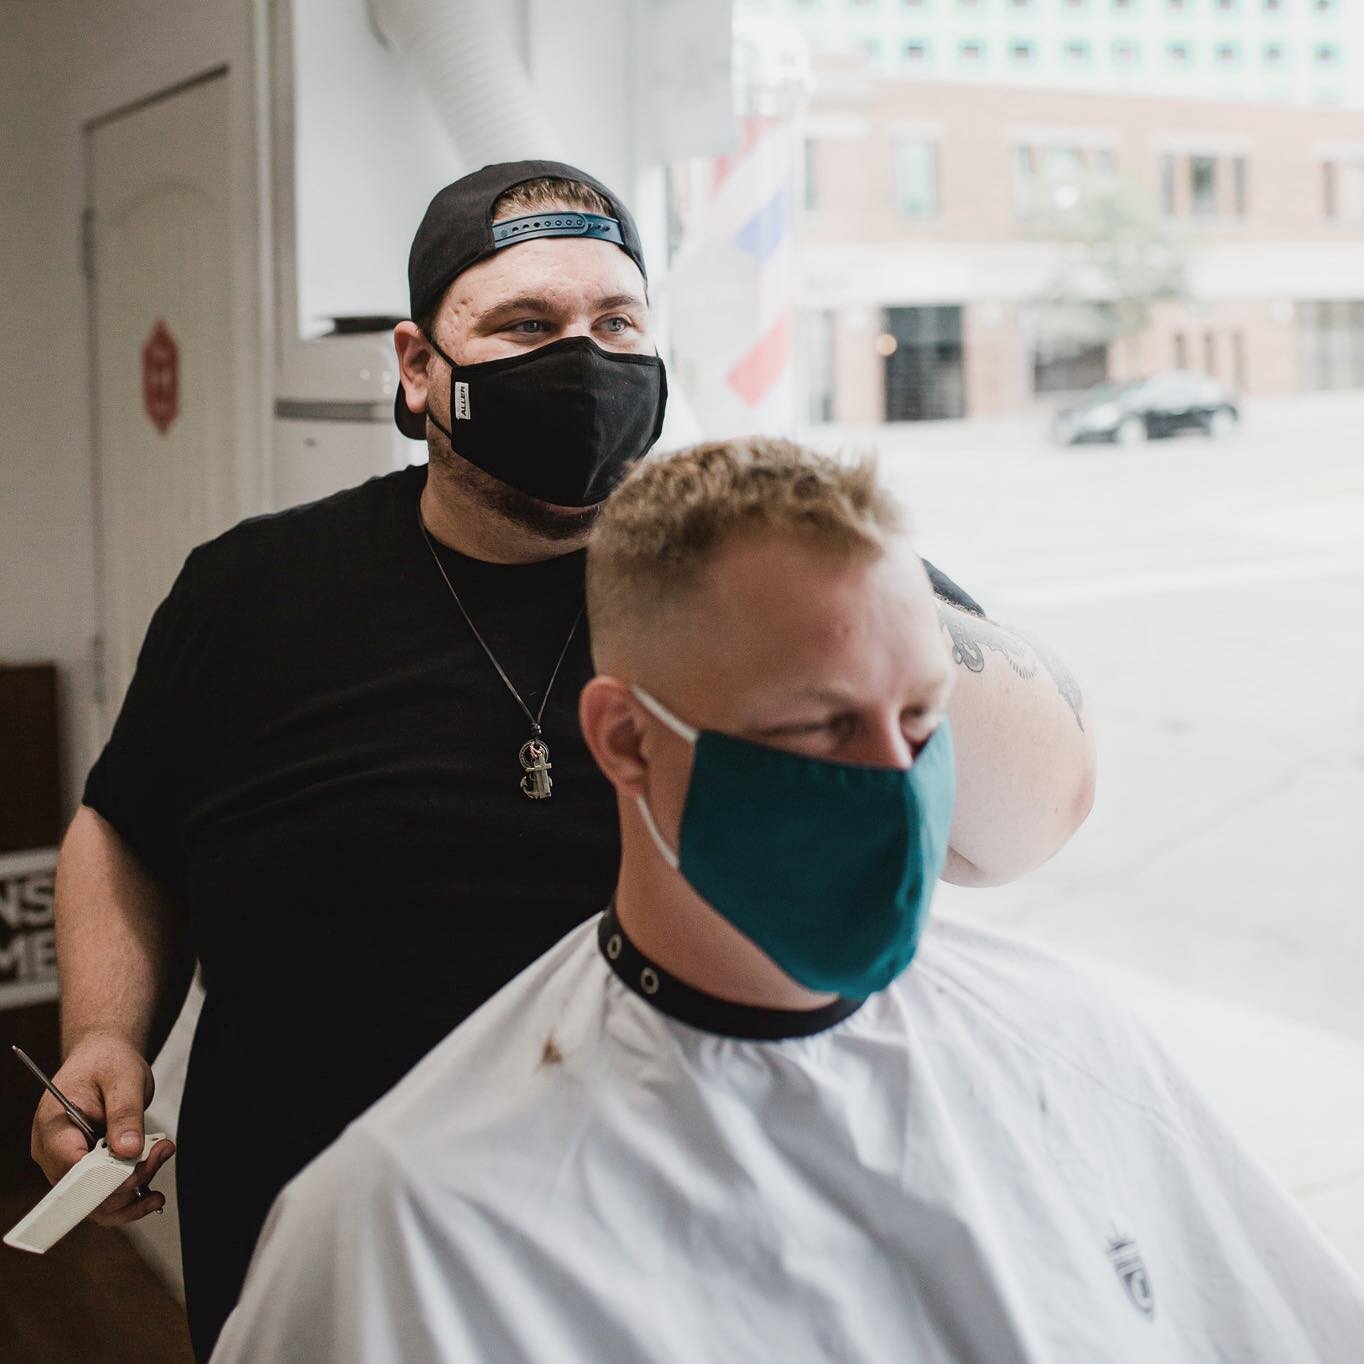 I miss seeing people&rsquo;s faces, but I&rsquo;m so grateful that I get to do what I do every day. The last couple months have been good for the soul. Big thanks to everyone who has come by for a cut, or bought some merch or coffee, or stopped in to